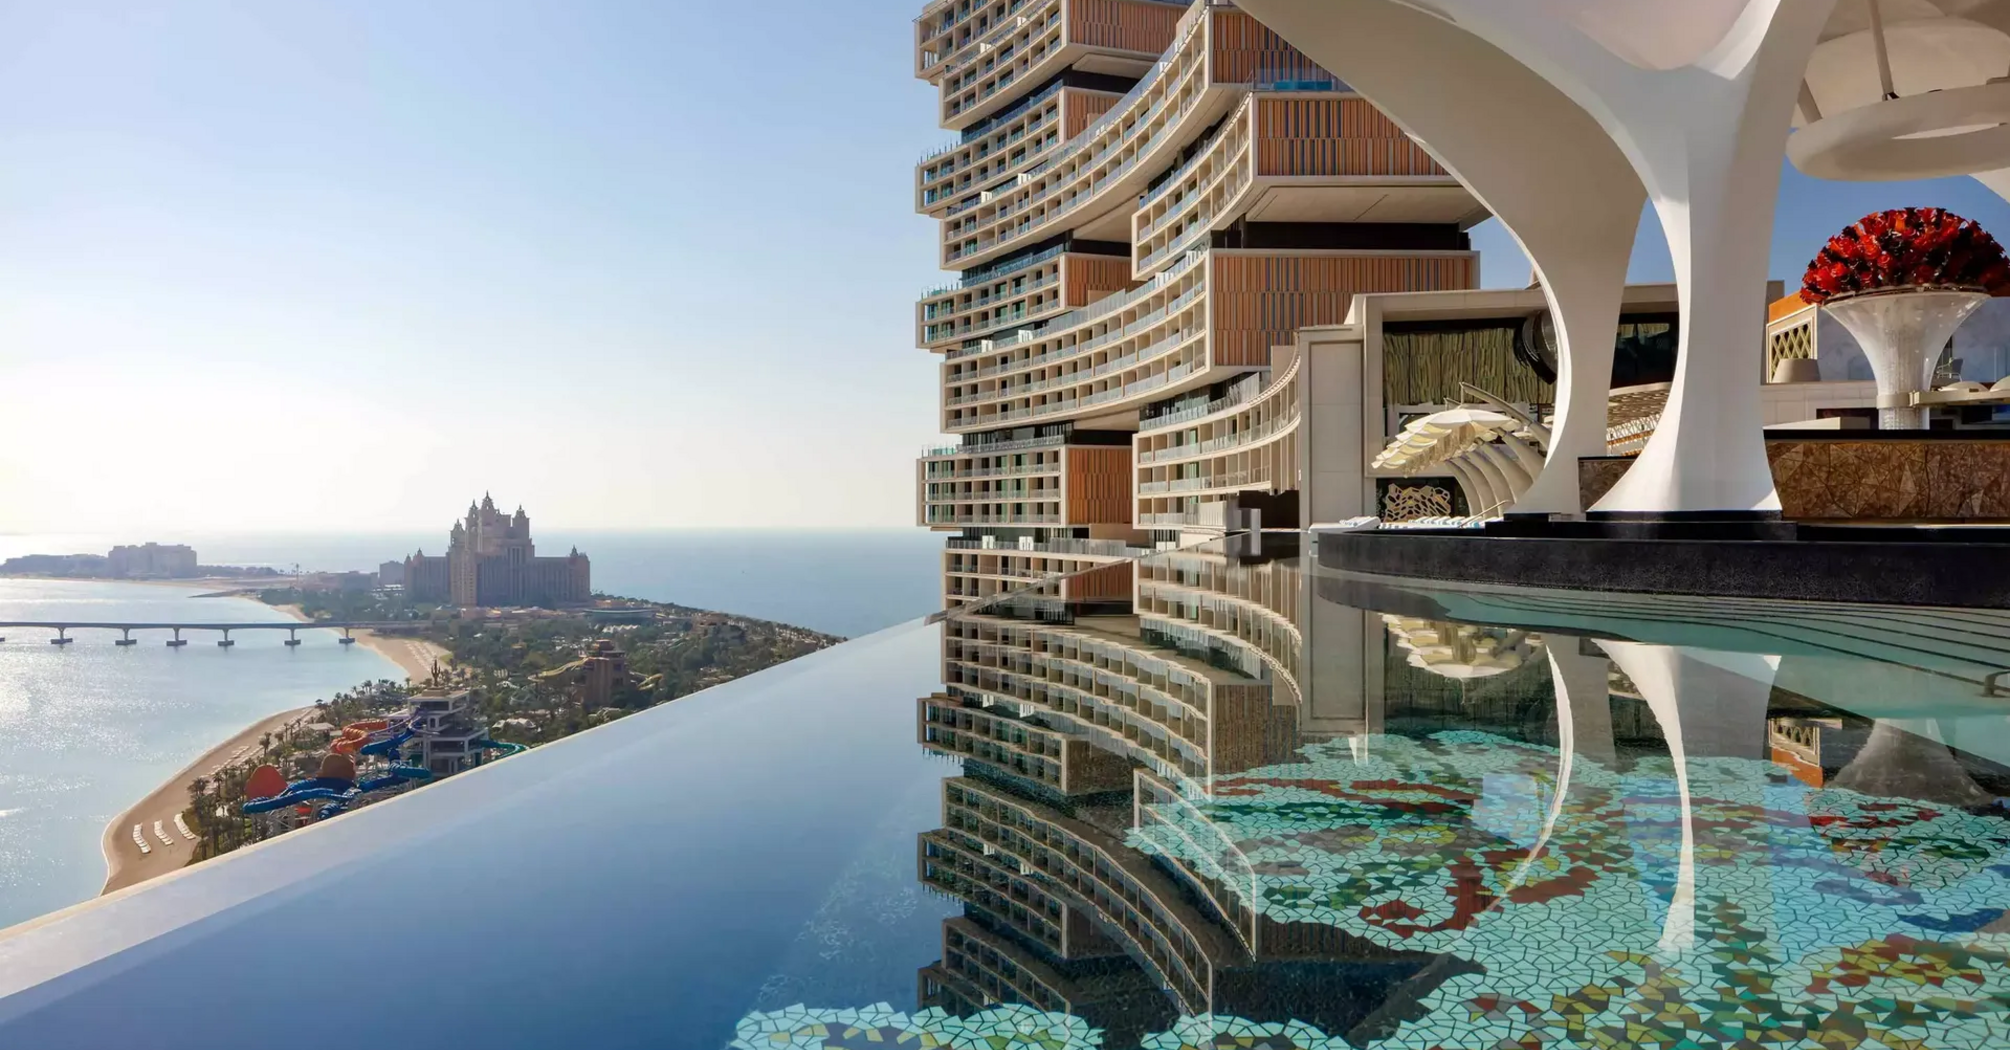 Atlantis The Royal: what is the longest mega-hotel in Dubai known for